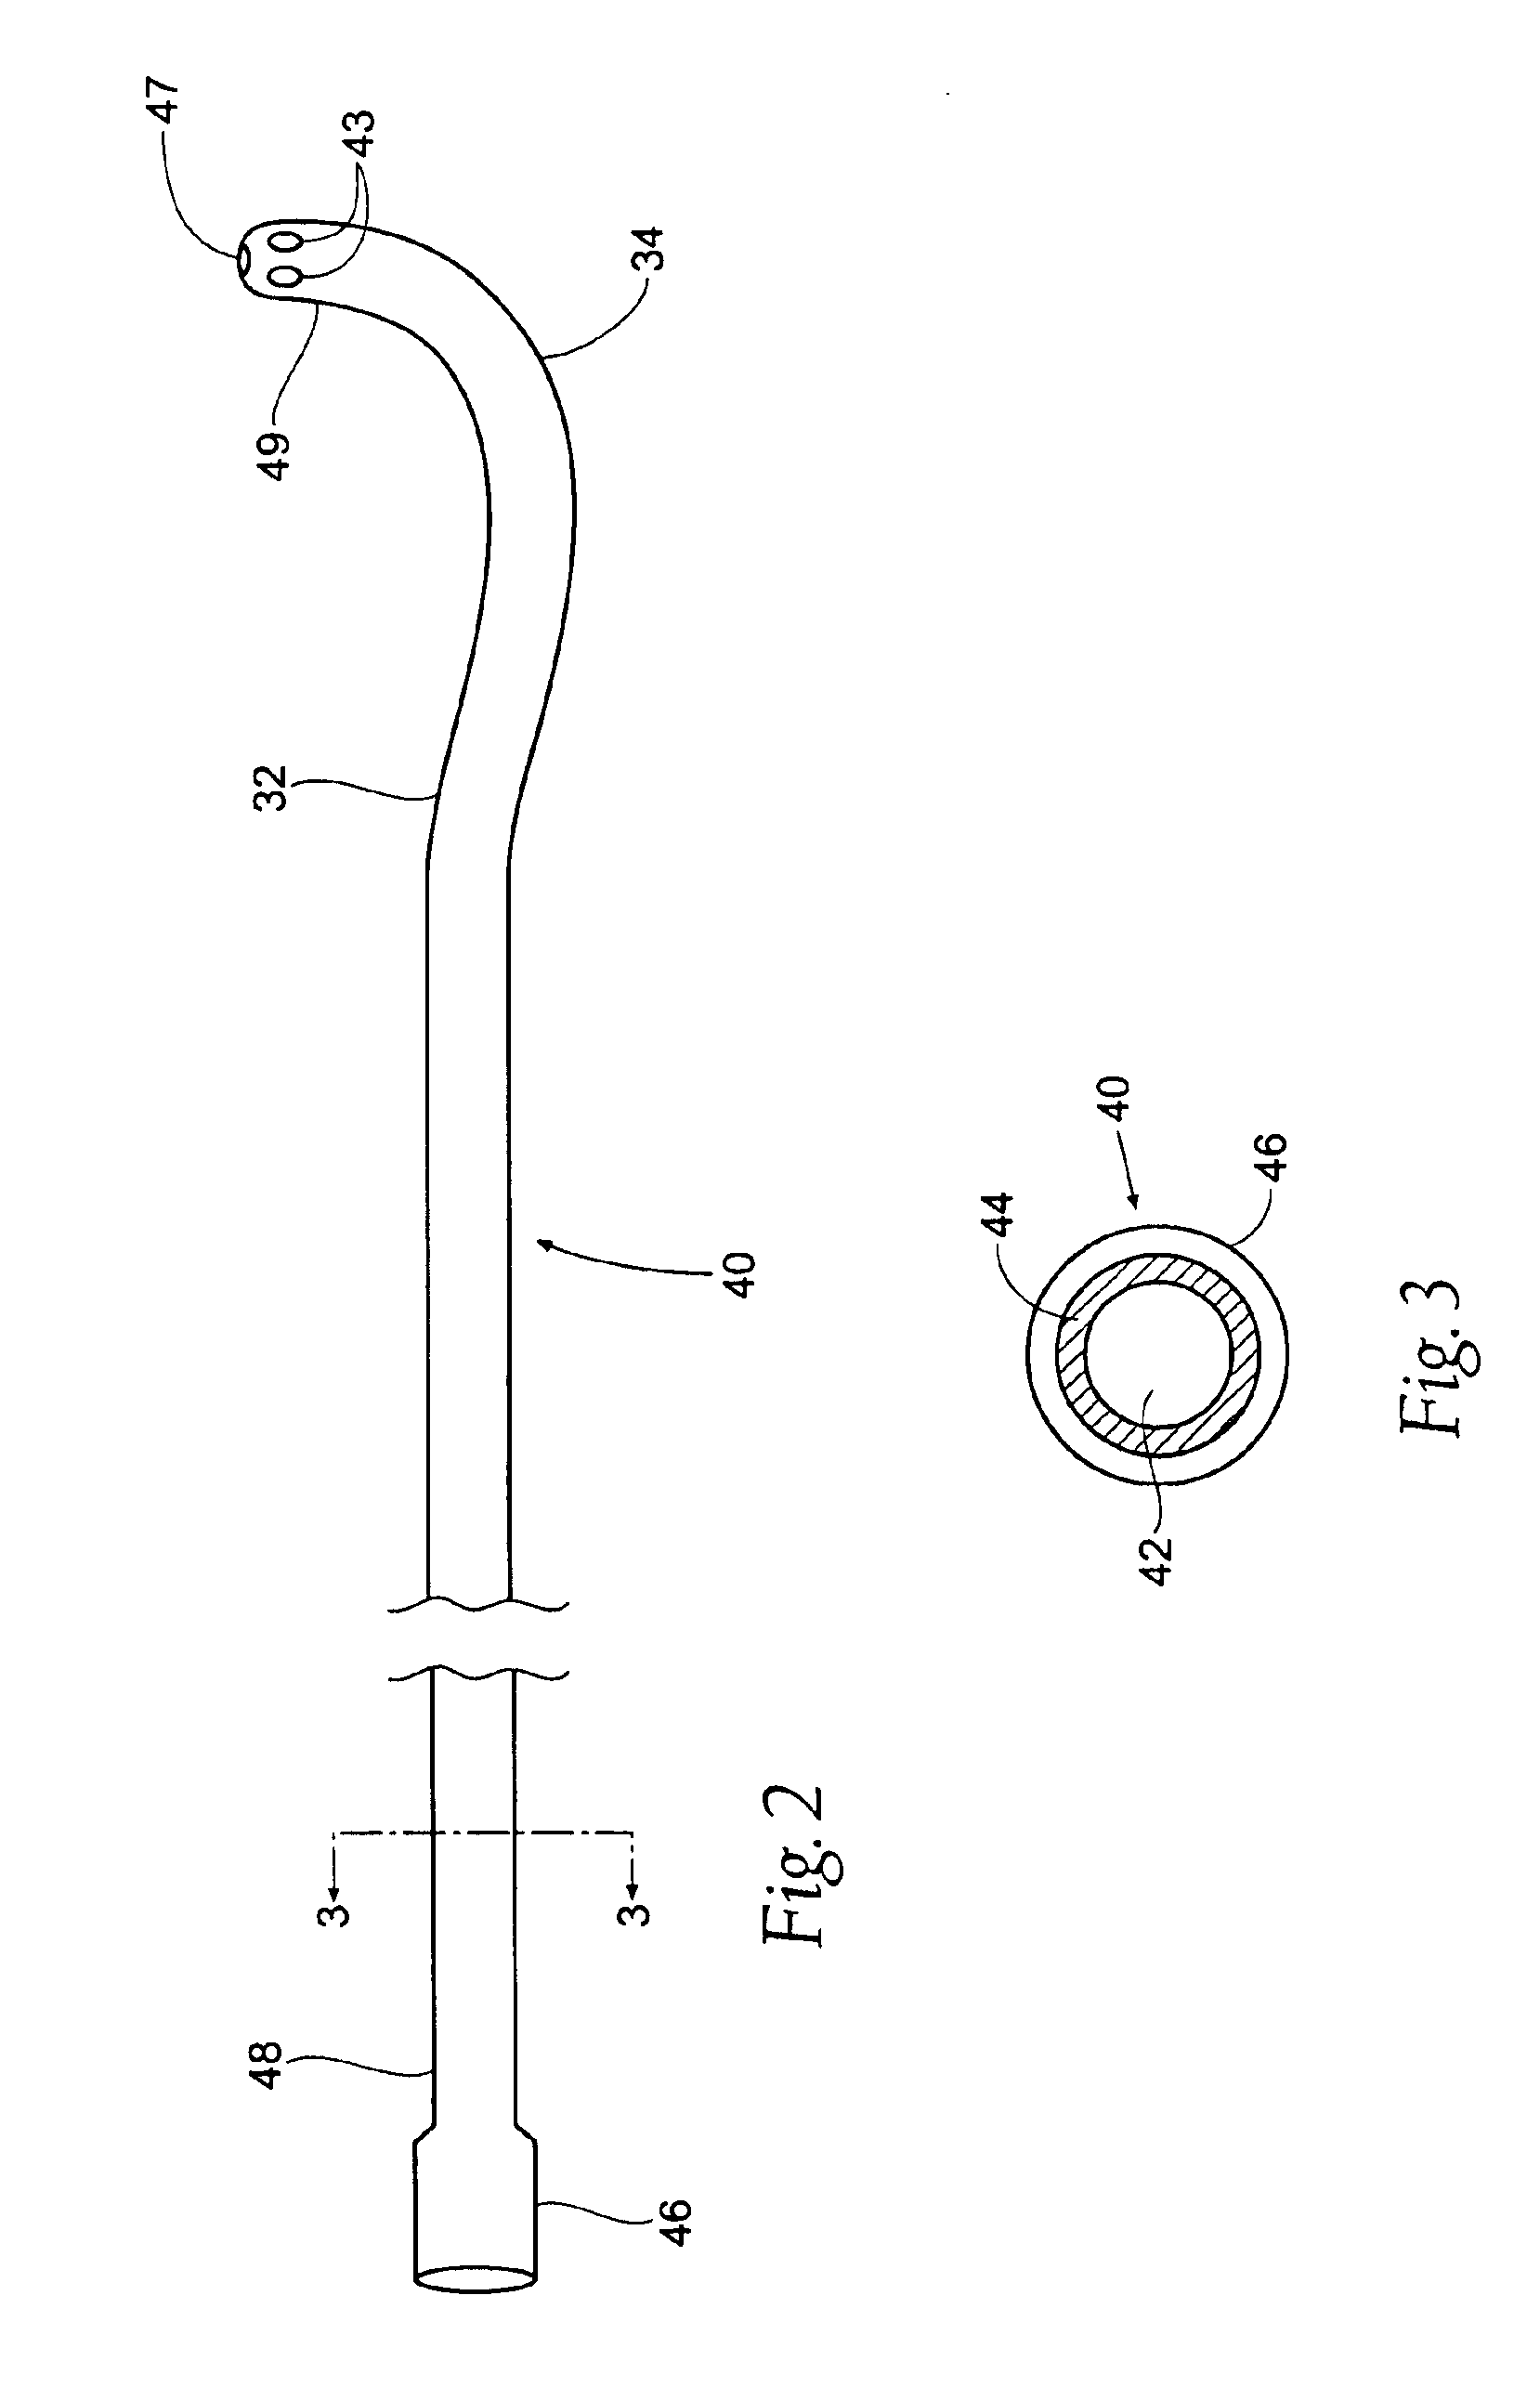 Intravascular cannulation apparatus and methods of use